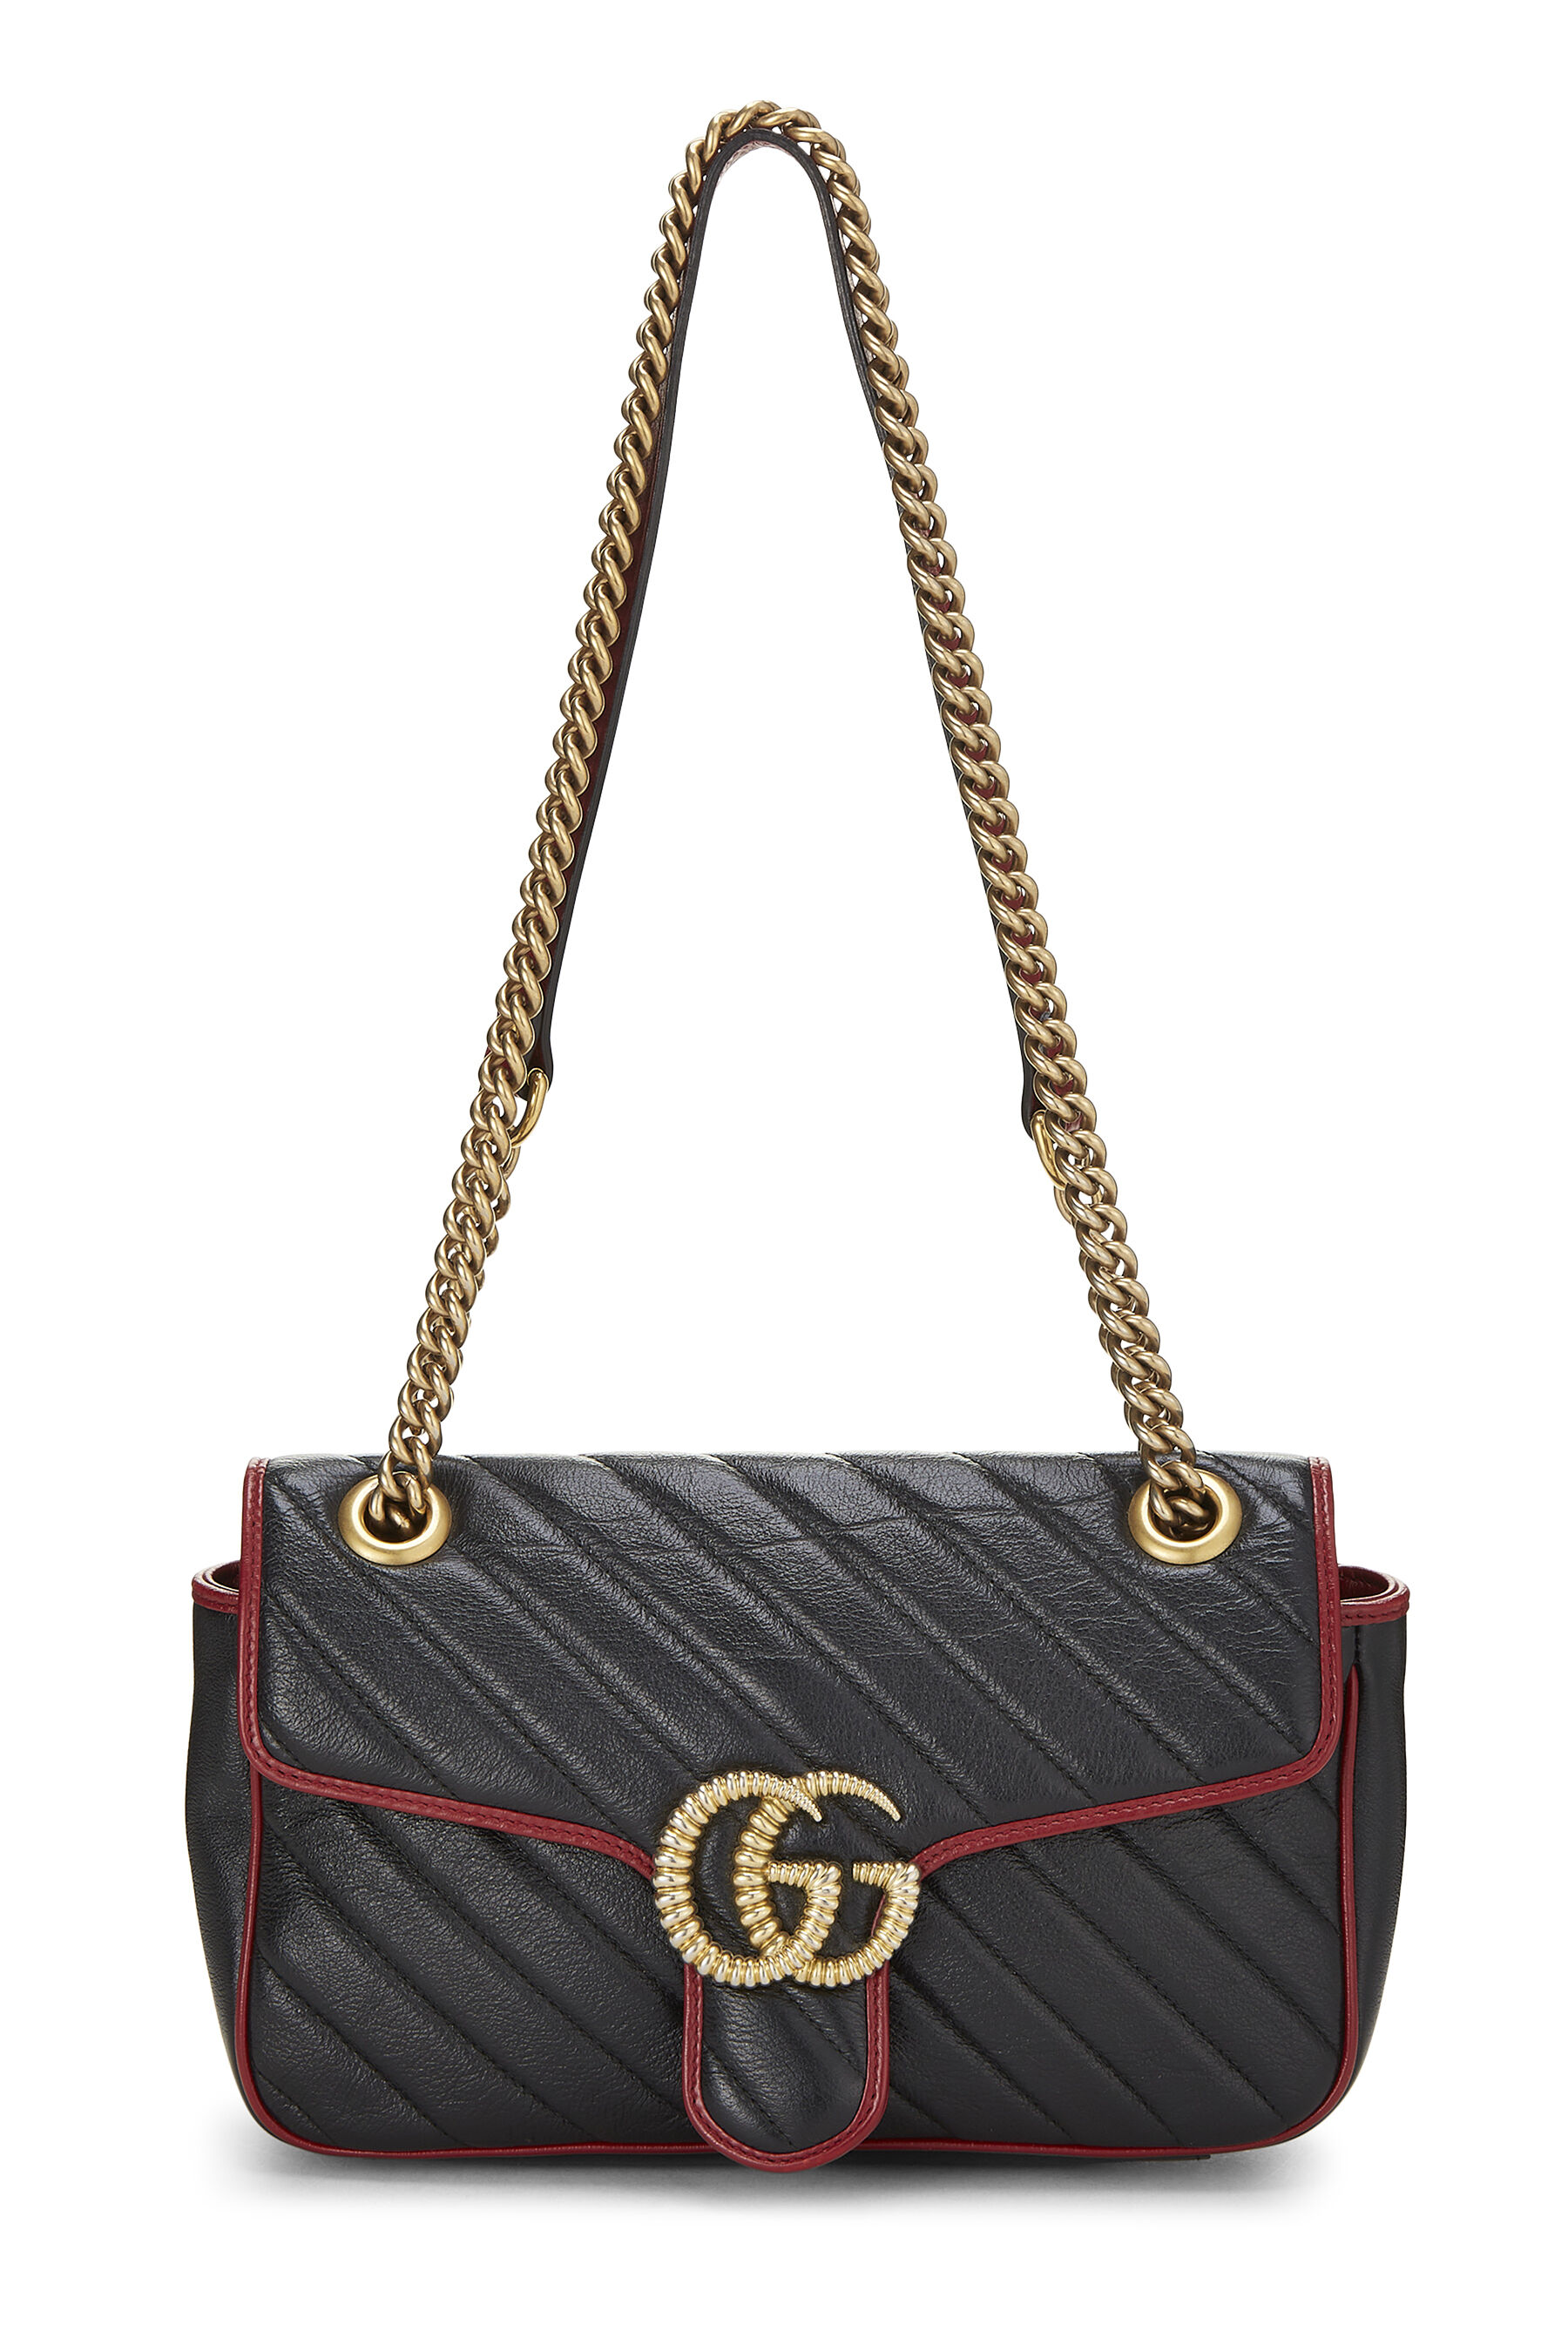 Gucci Black Leather Torchon GG Marmont Shoulder Bag Small